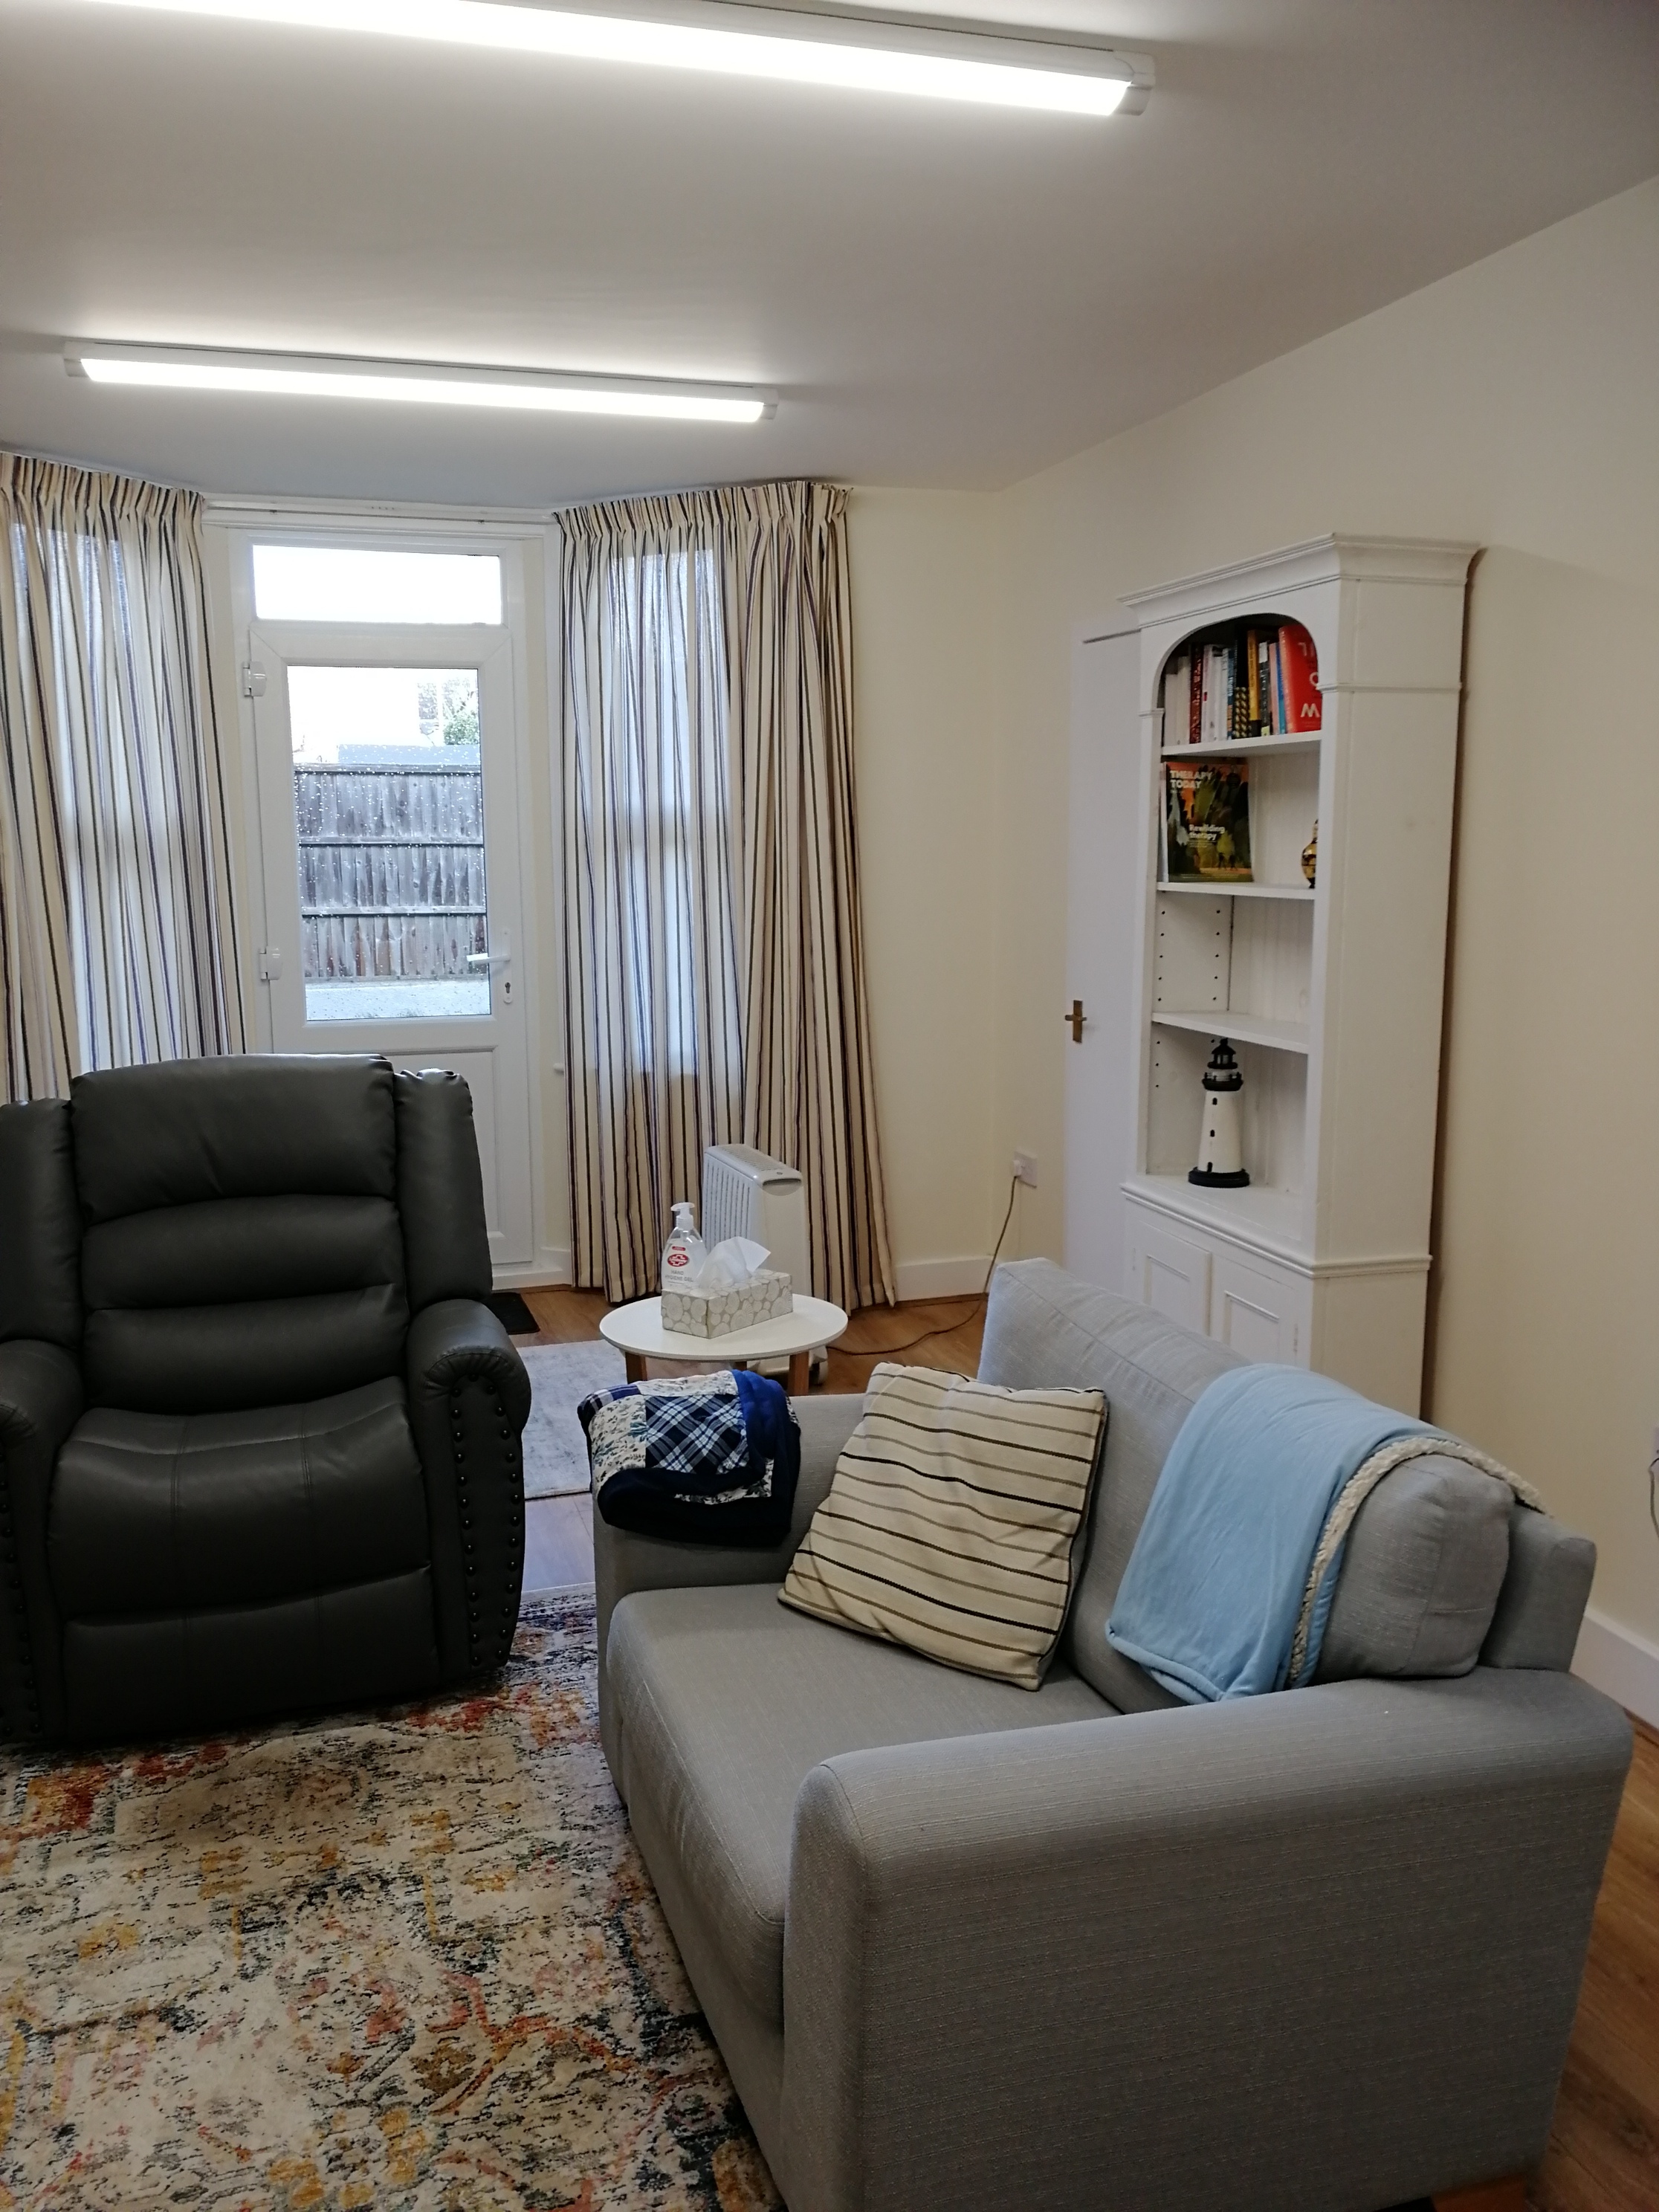 Therapist room with comfy chair and sofa